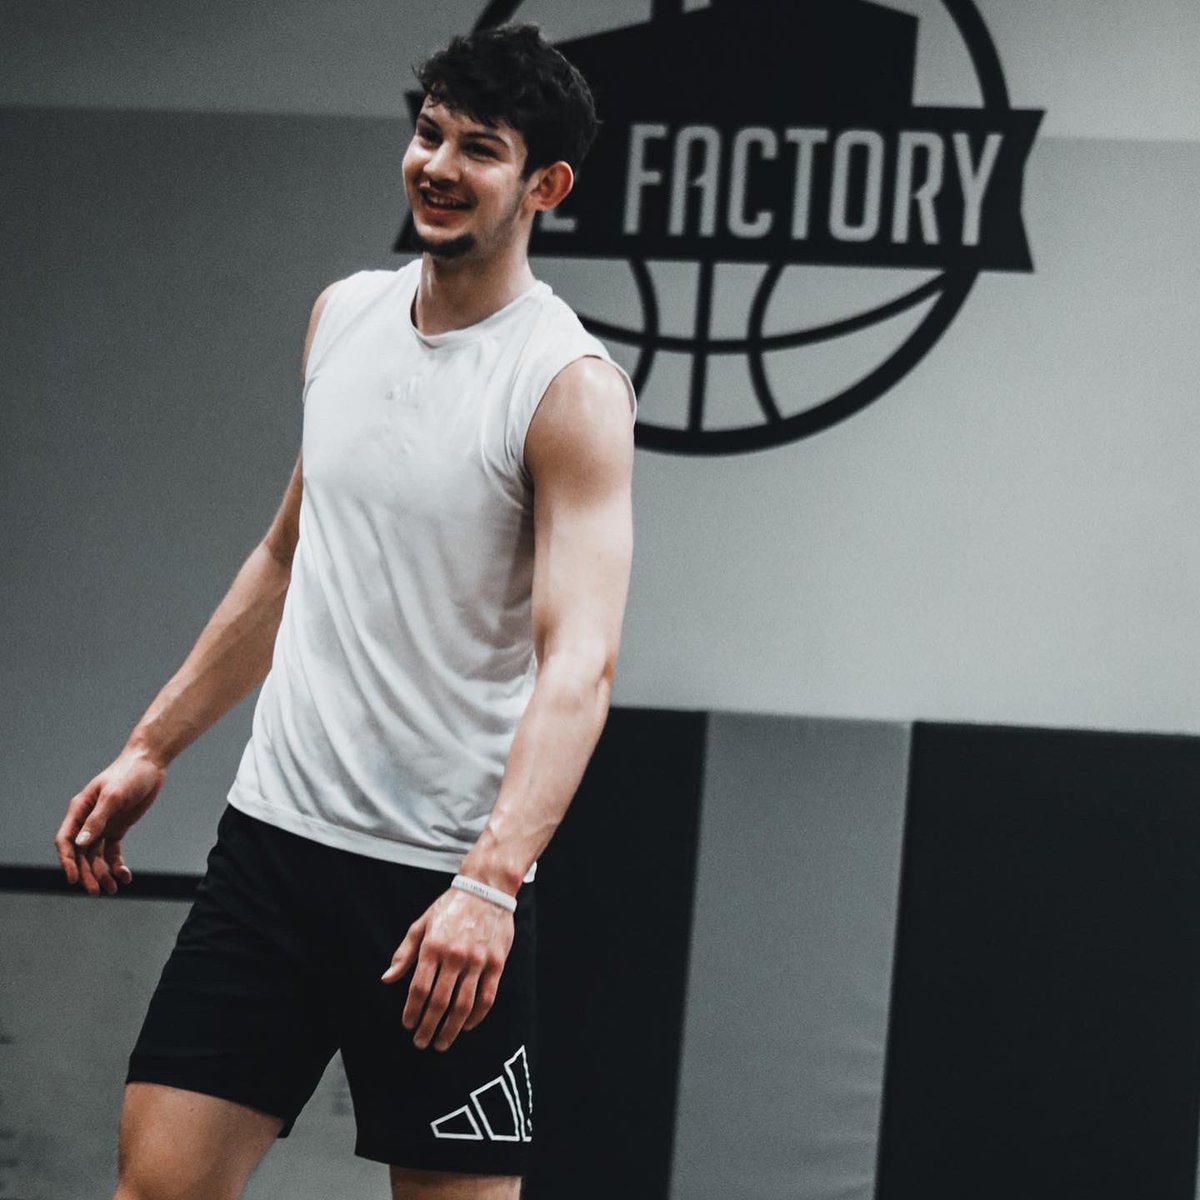 Cut from a different cloth 🧵 @FrankieFidler_ ✖️ Coach Mackie #thefactory #factory #basketball #ball #post #viral #instagram #instagood #instalike #instadaily #insta #ncaa #usa #nebraska #omaha #fyp #fypシ #fypage